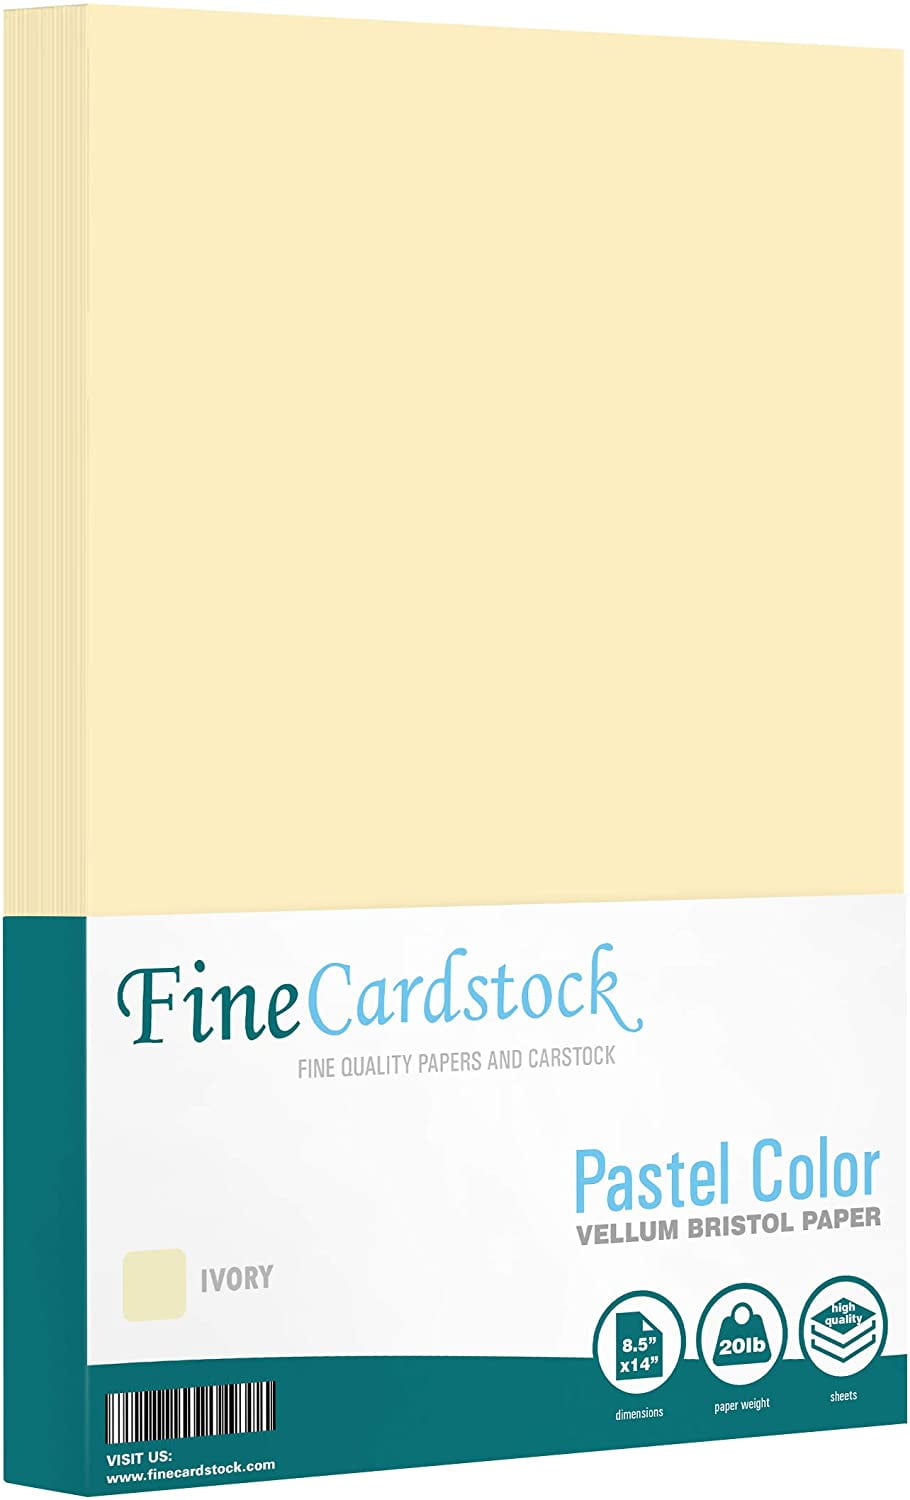 8.5 x 14” Pastel Color Paper – Great for Cards and Stationery Printing, Legal, Menu Size, Lightweight 20lb Paper, 100 Sheets